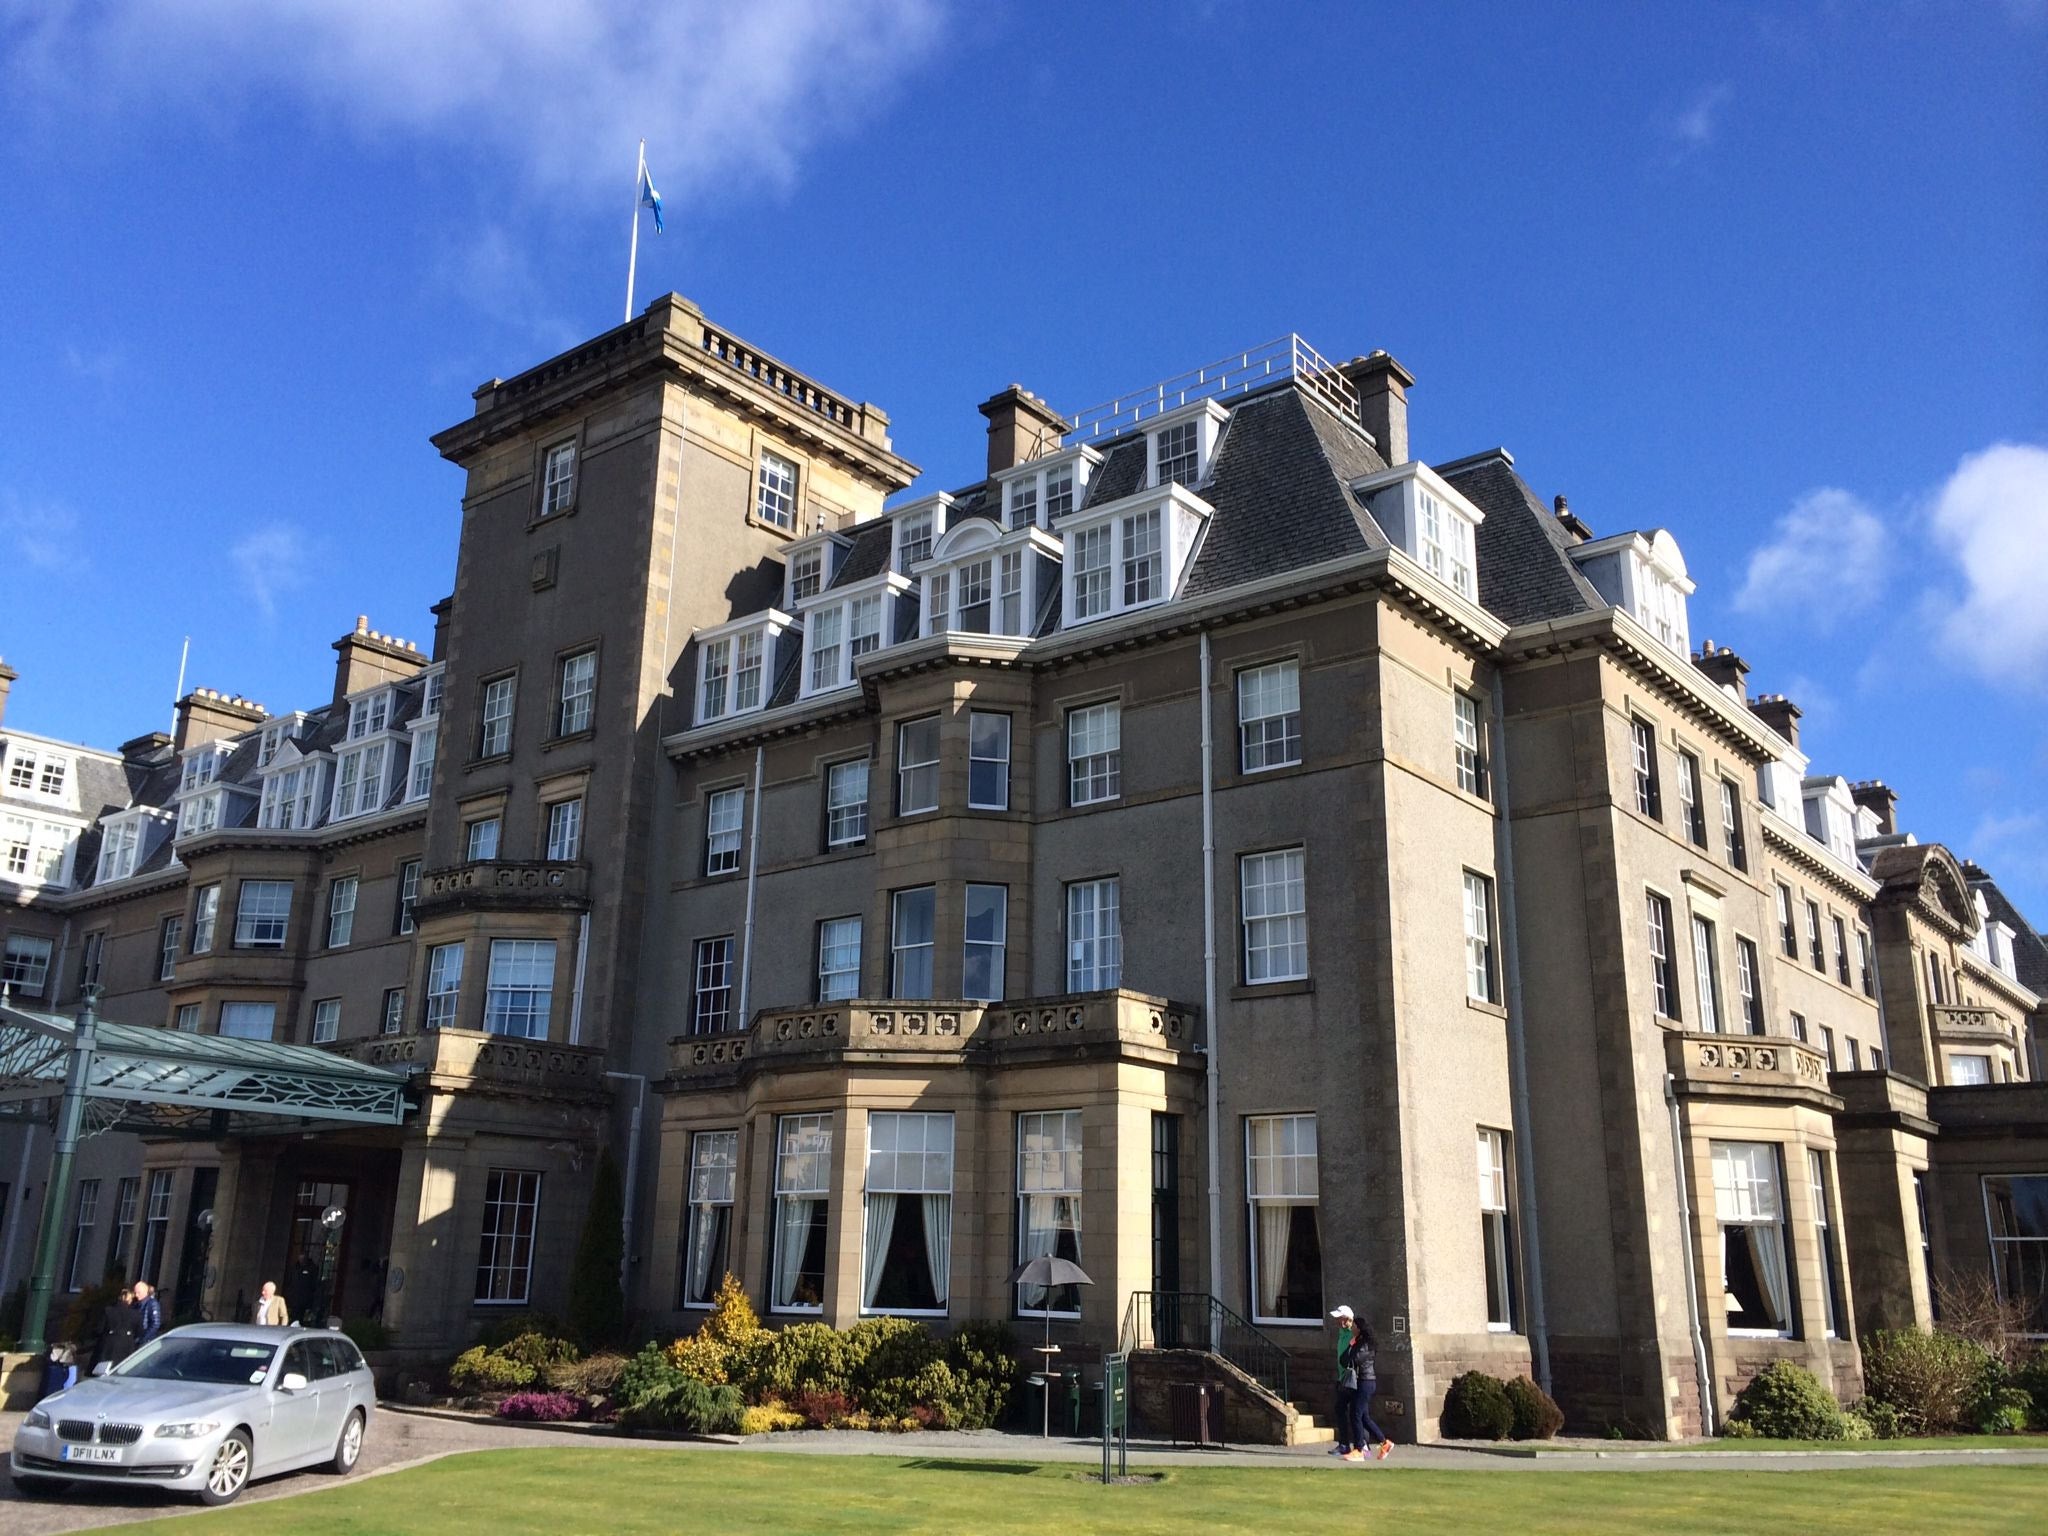 Gleneagles offers activities such as golf, swimming, archery and mini Land Rover driving to entertain families